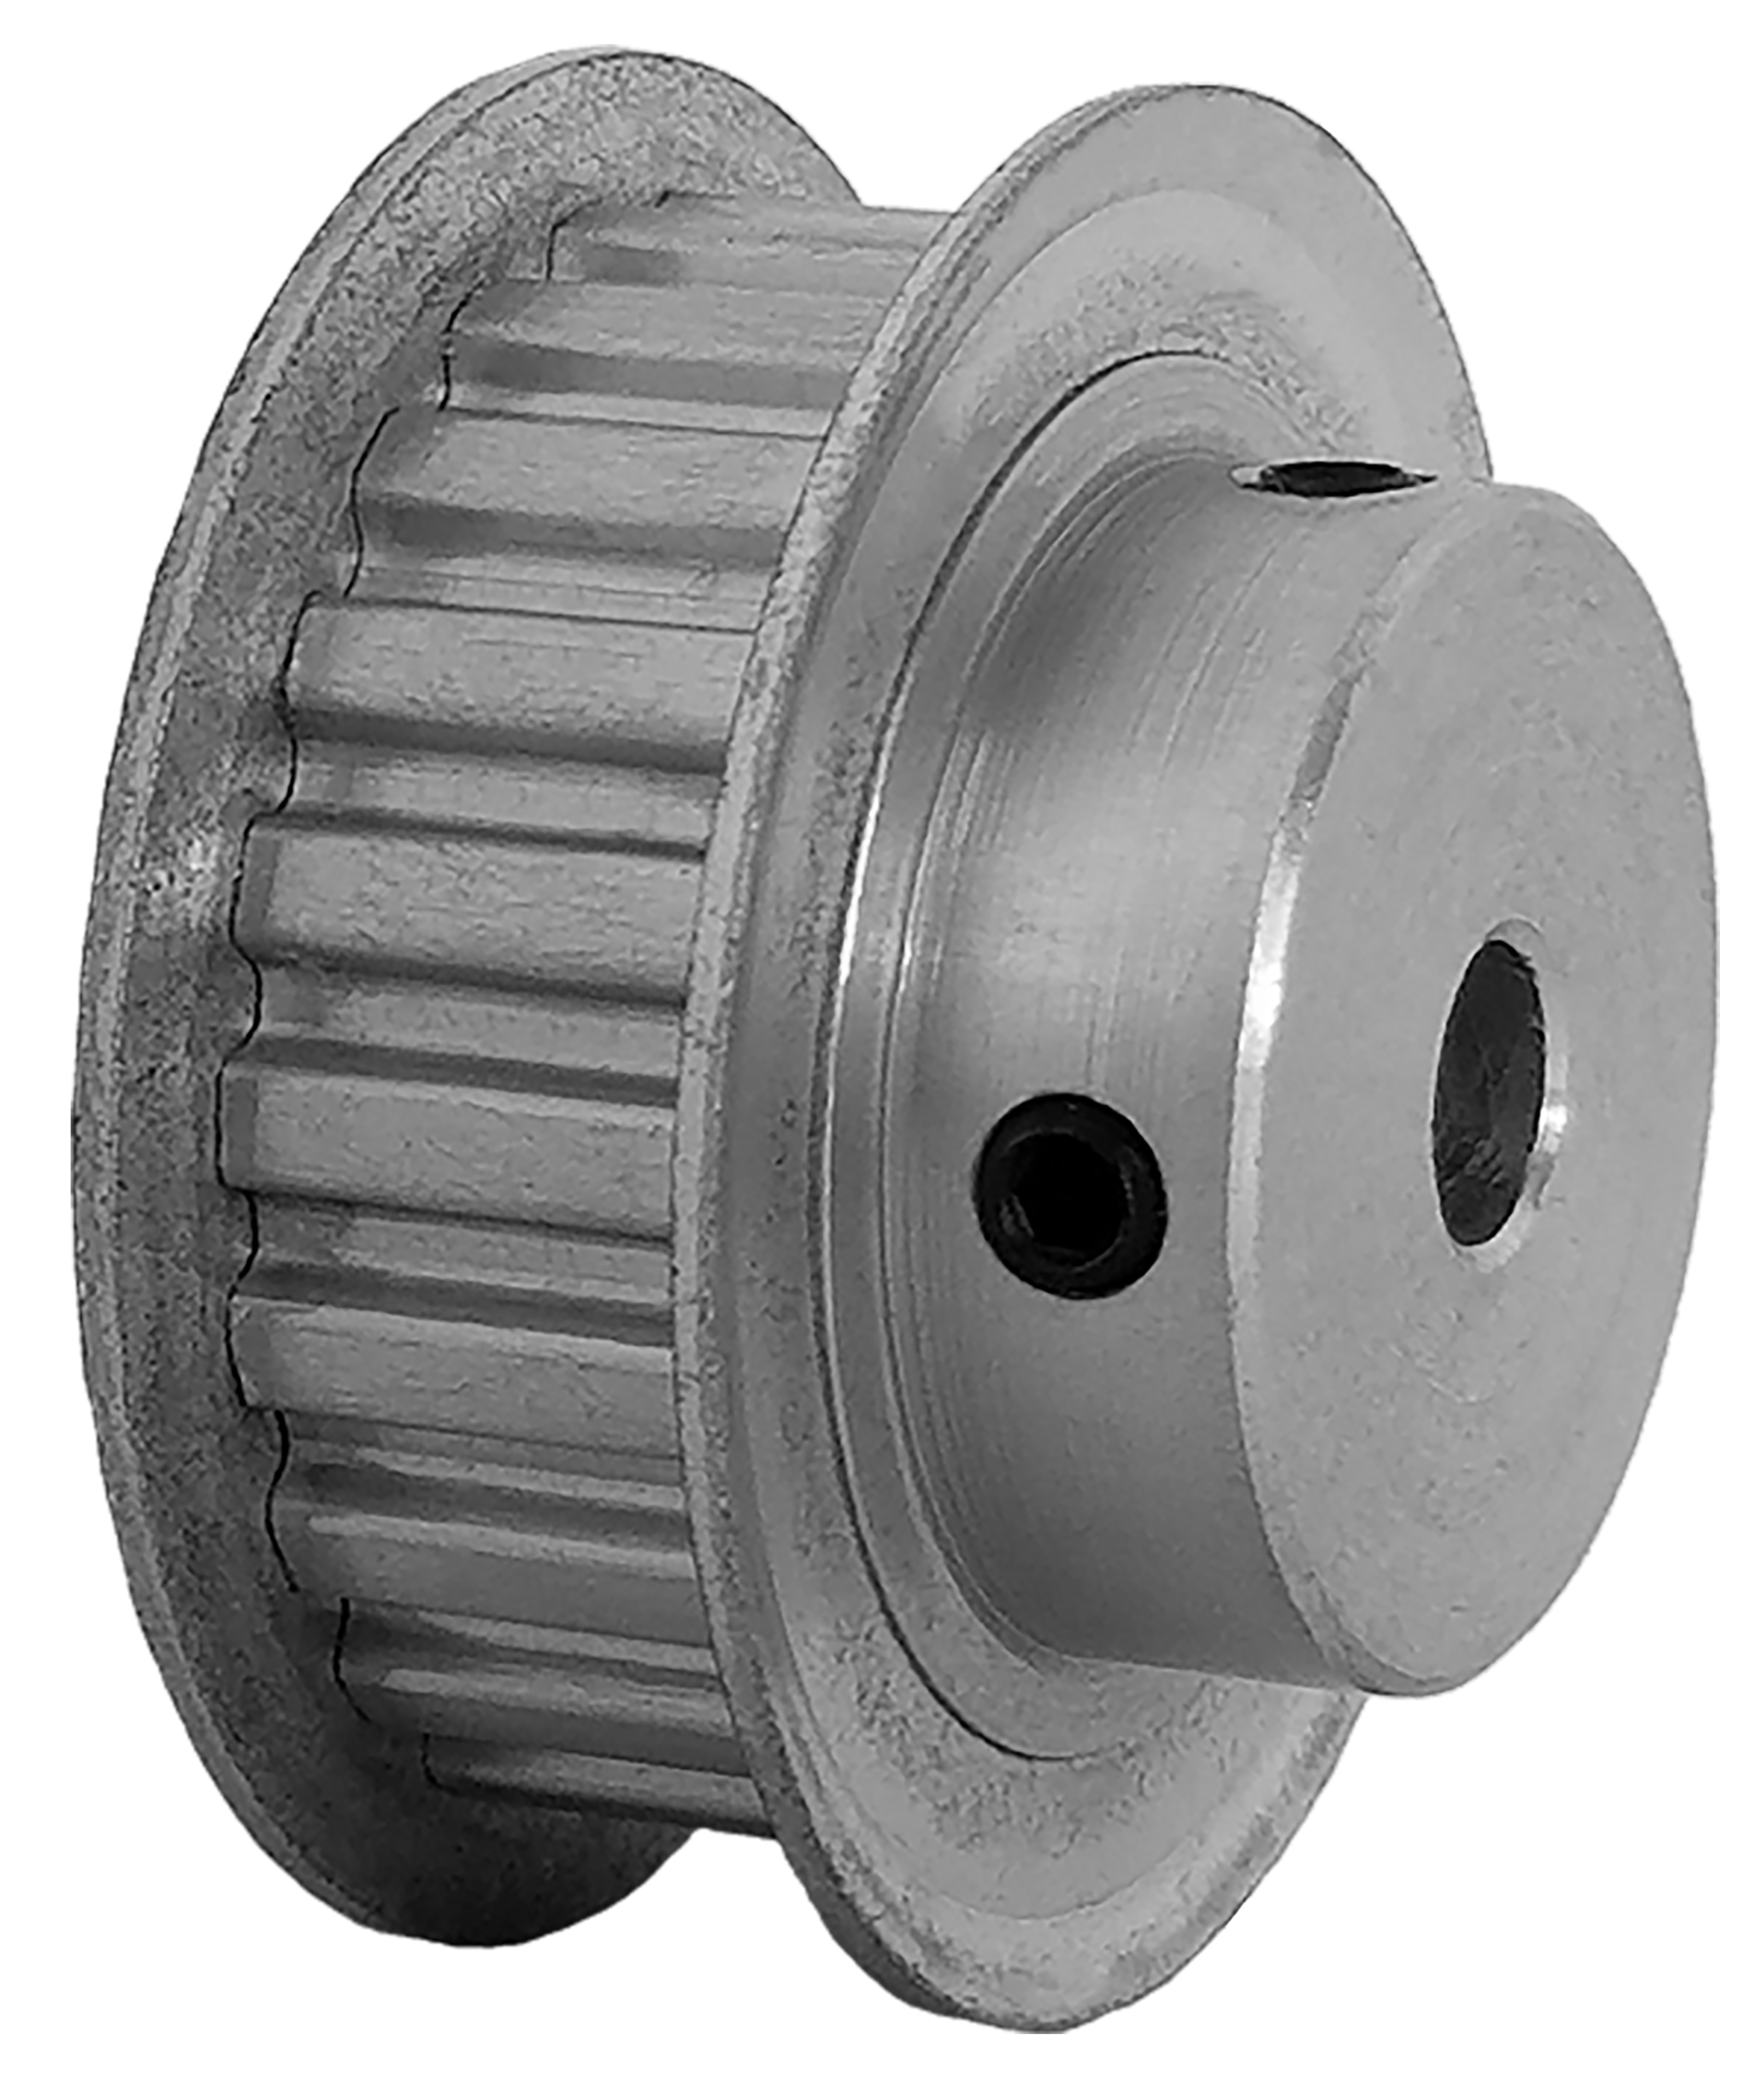 22XL037-6FA3 - Aluminum Imperial Pitch Pulleys